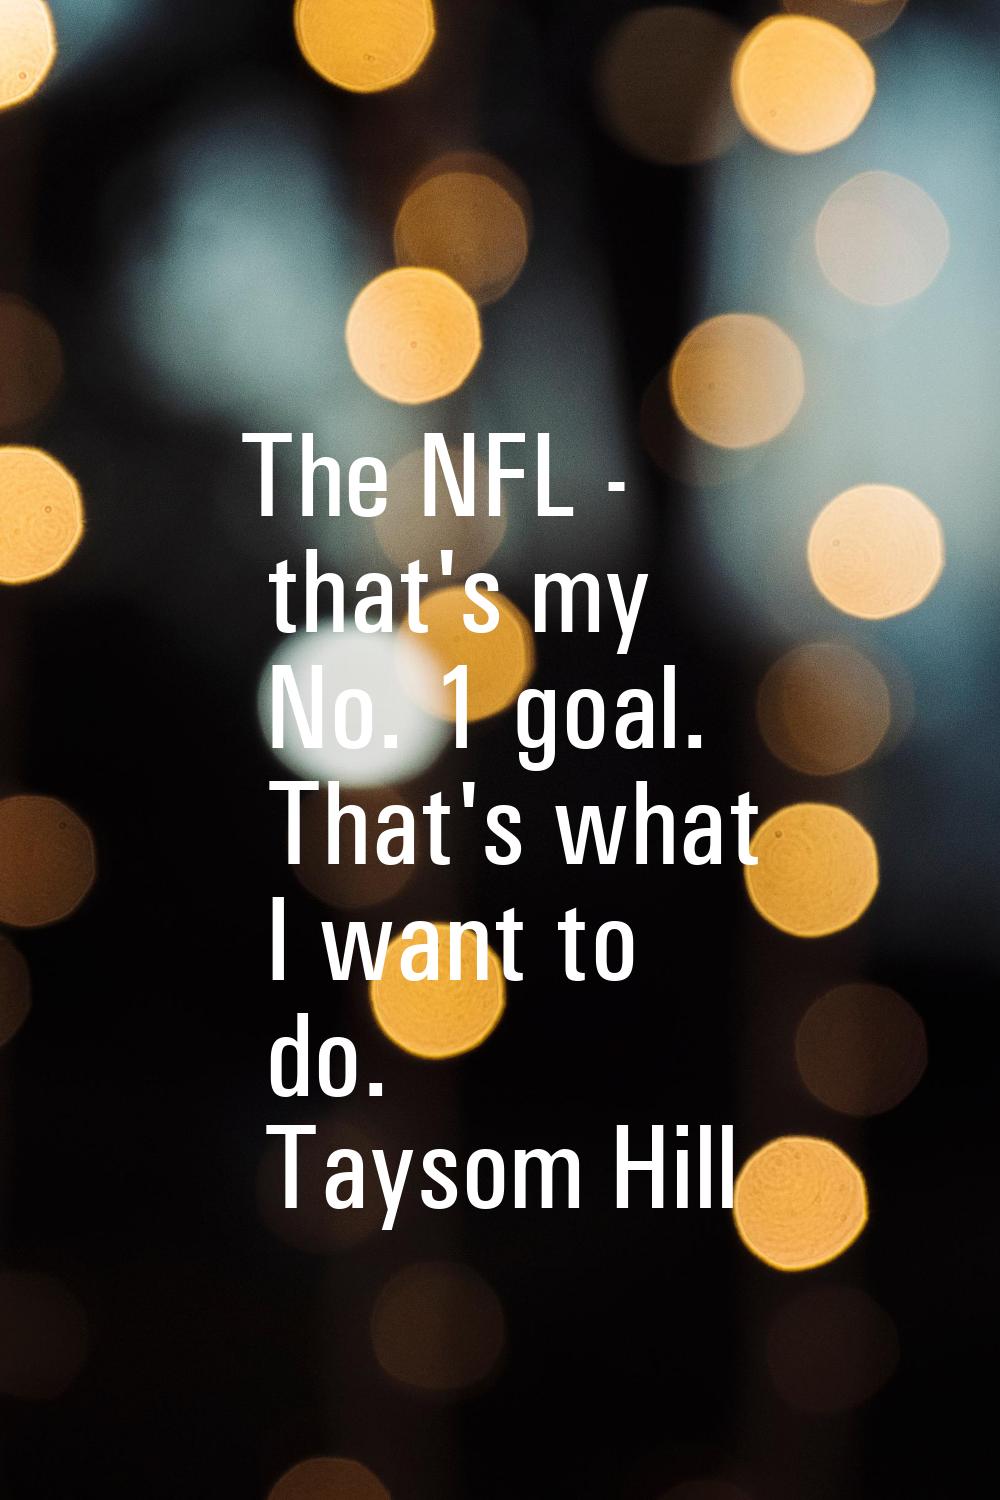 The NFL - that's my No. 1 goal. That's what I want to do.